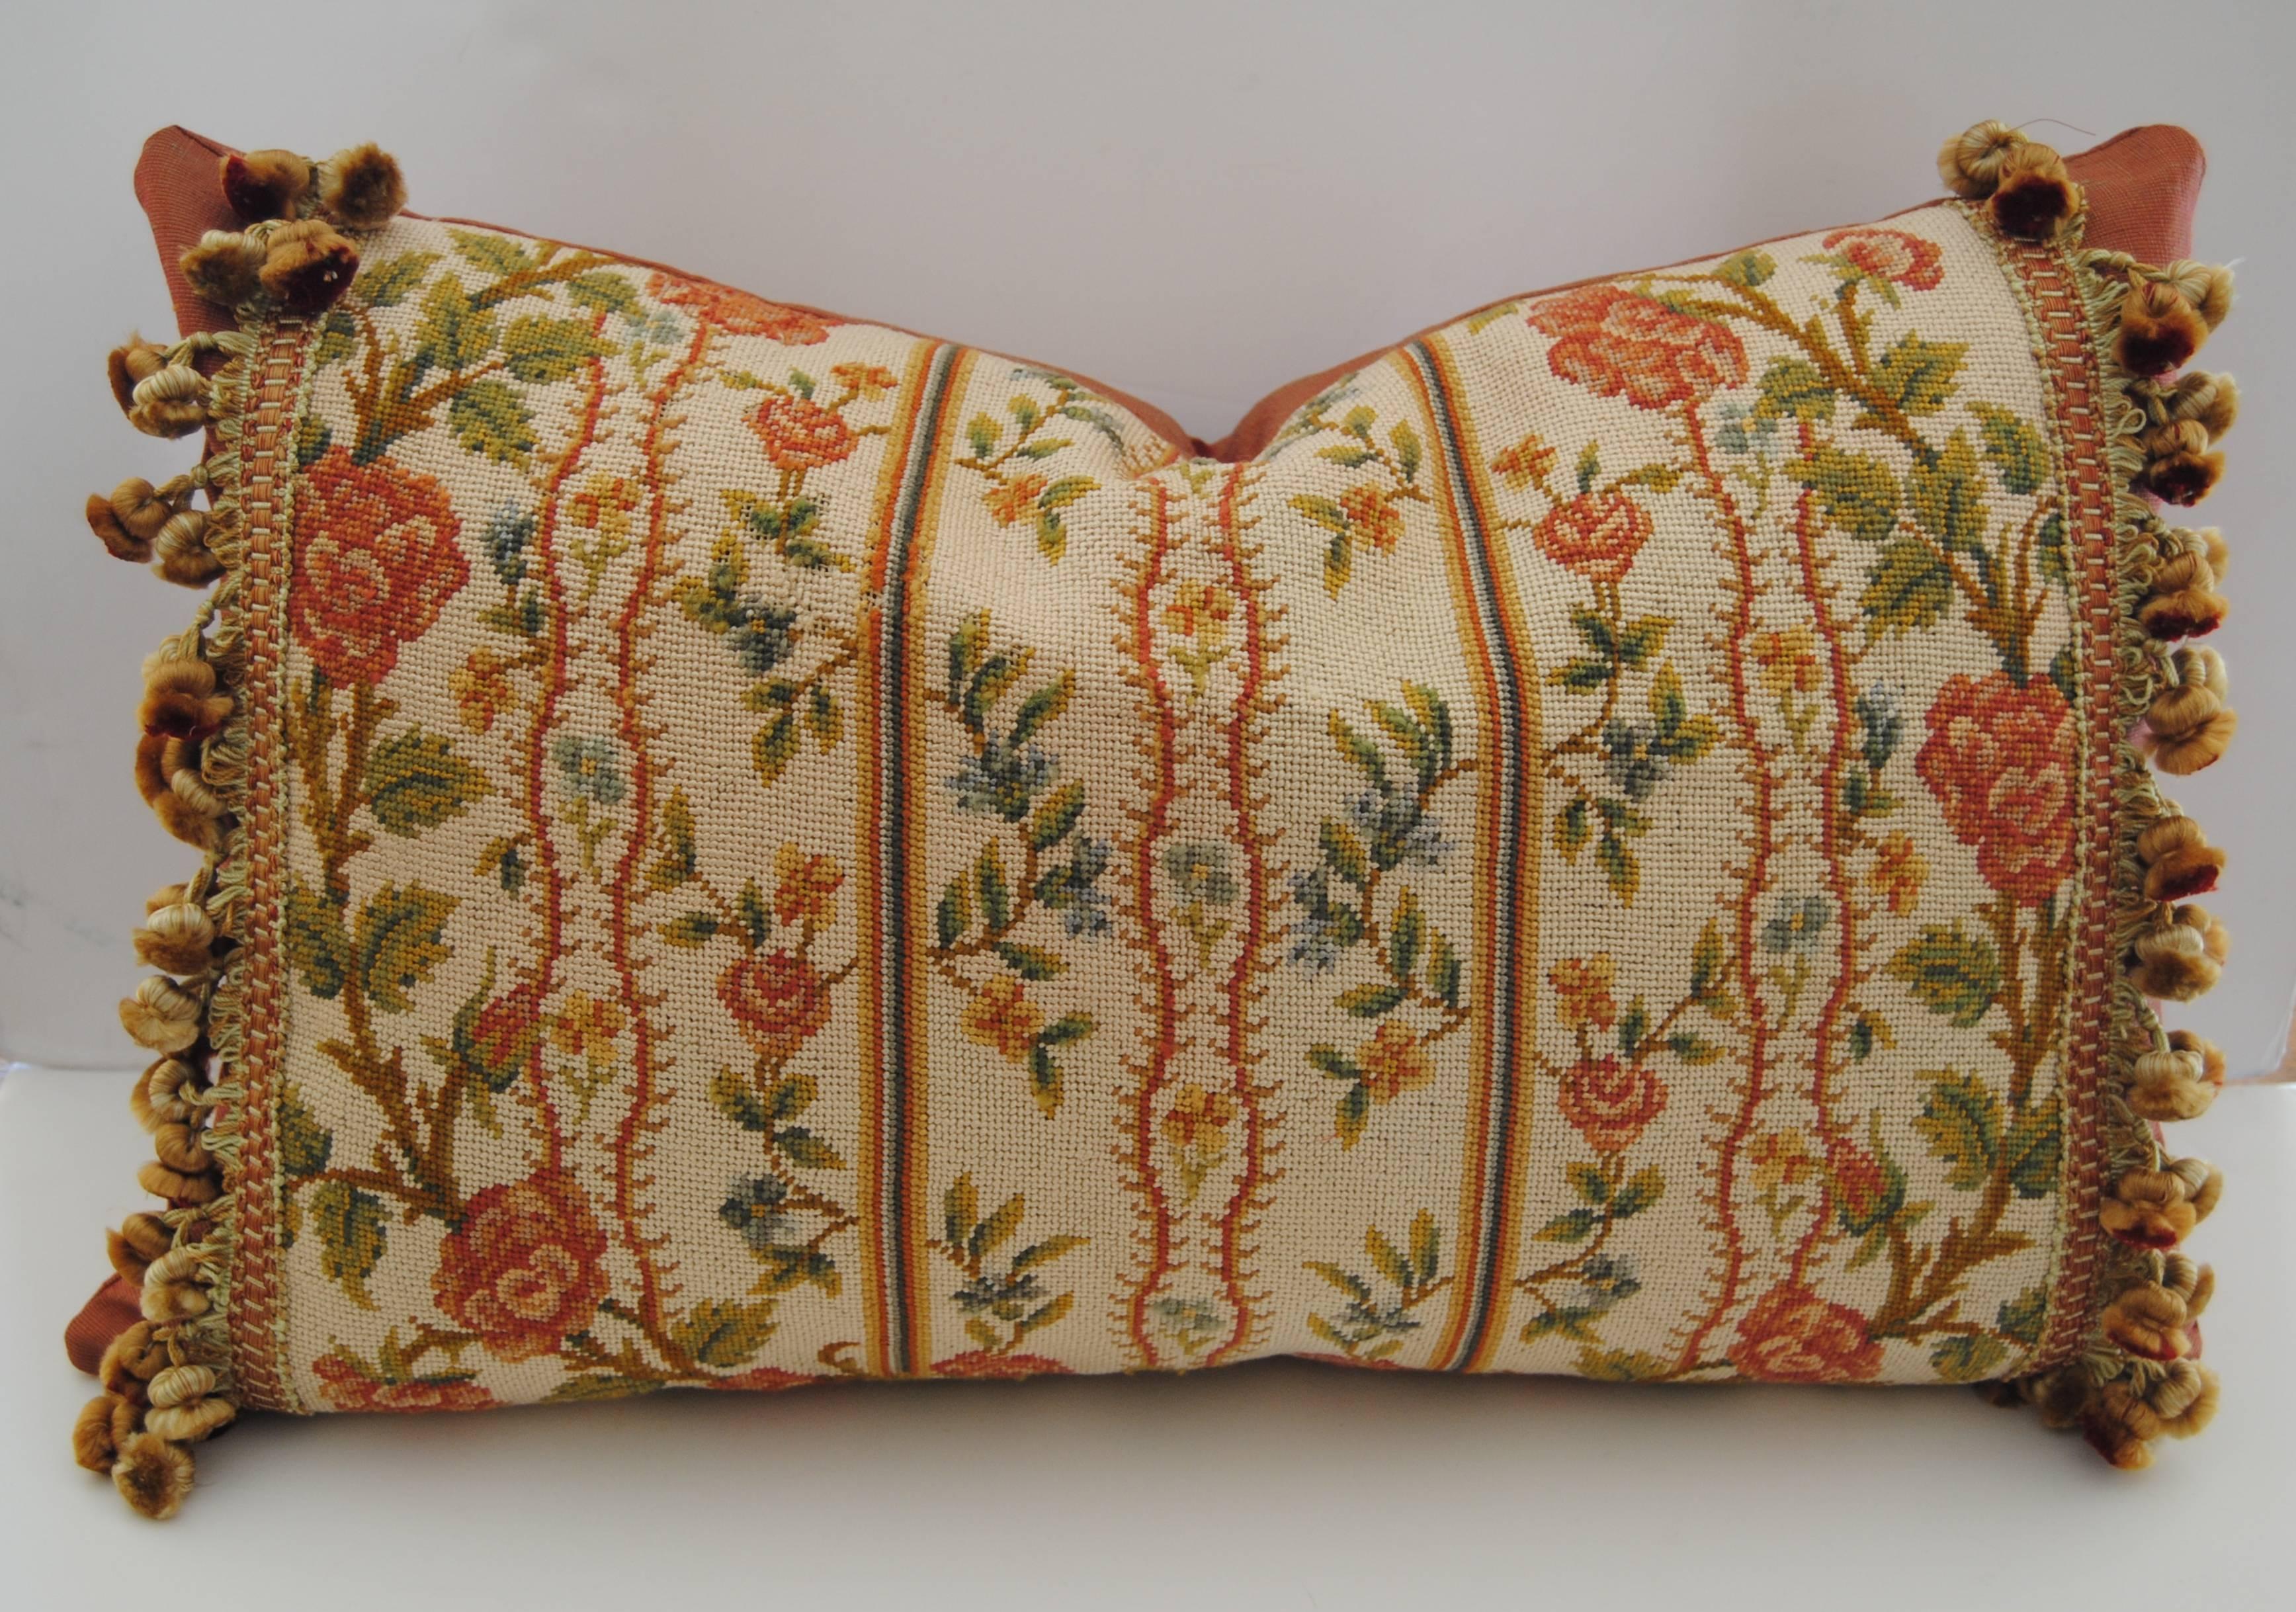 Custom pillow cut from an antique French needlepoint fragment from late 1800s. Hand worked in silk and wool with good color. Minor thread loss, shown in photo but not detracting from the design. Pillow is edged with Scalamandre silk tassel trim and